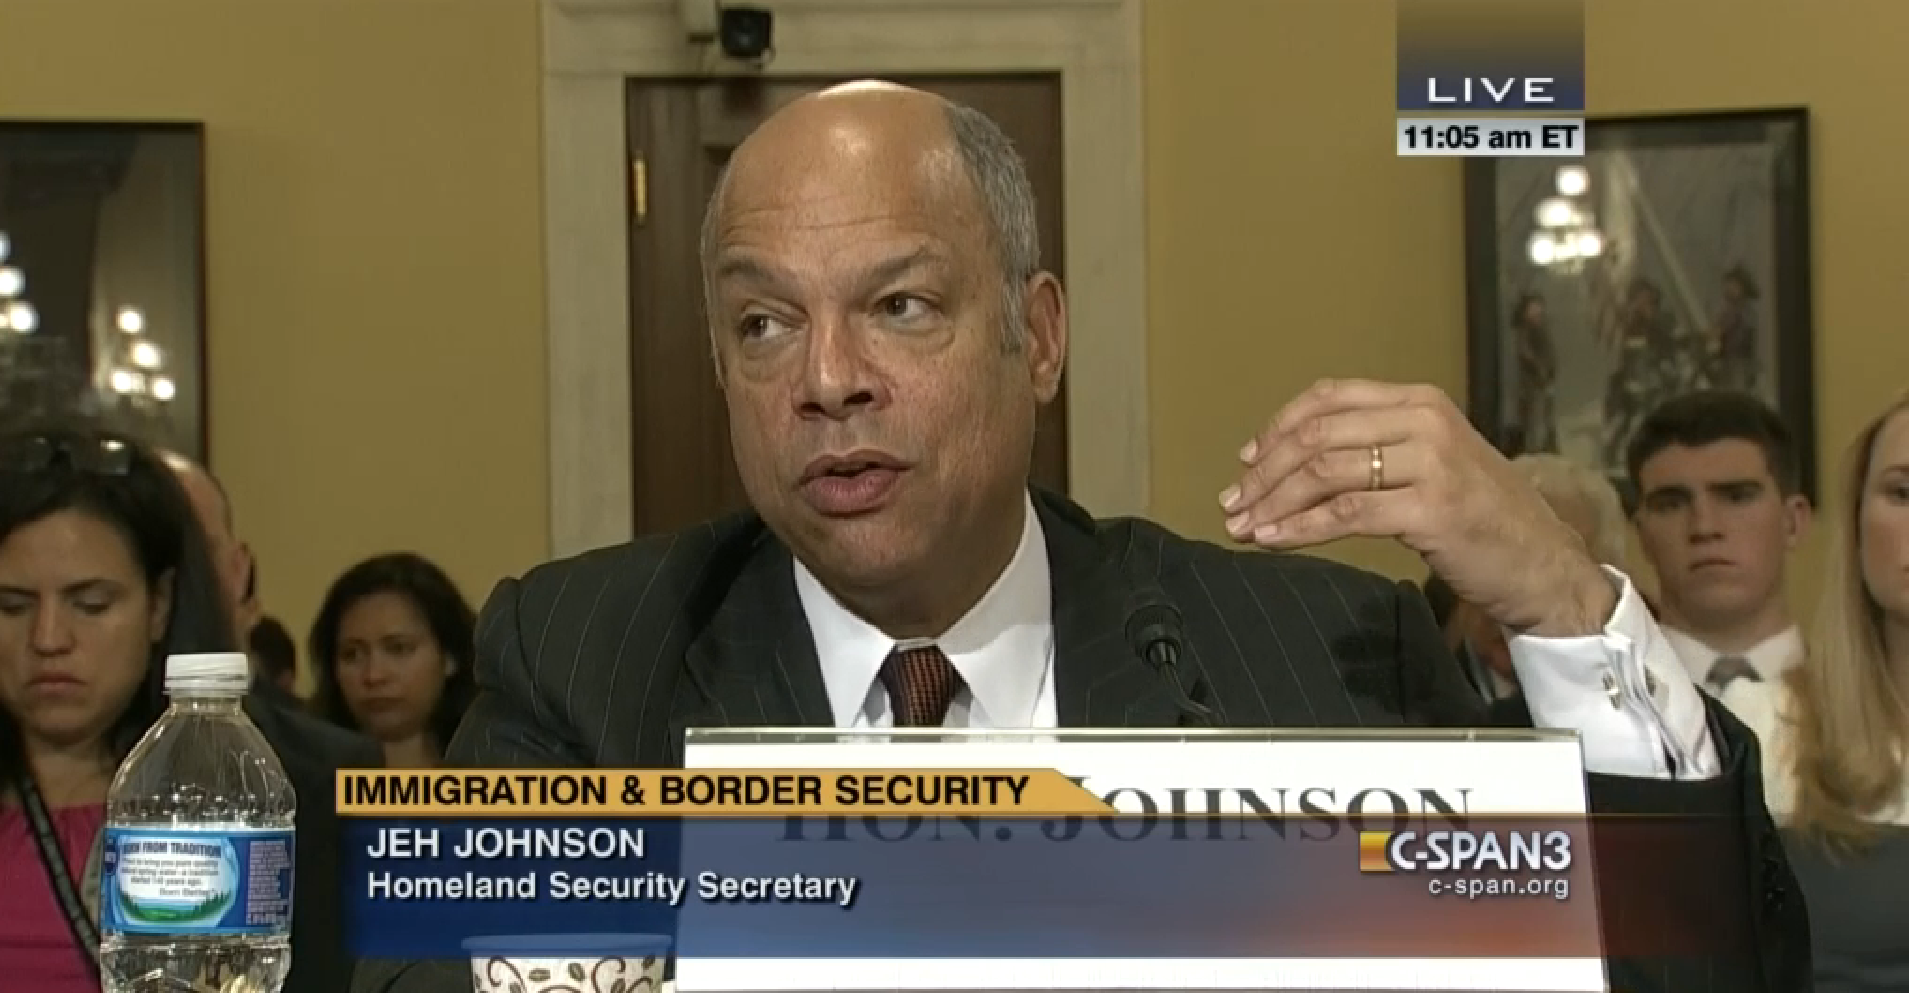 Homeland Security Secretary Makes the Case for Immigration Actions in House Hearing